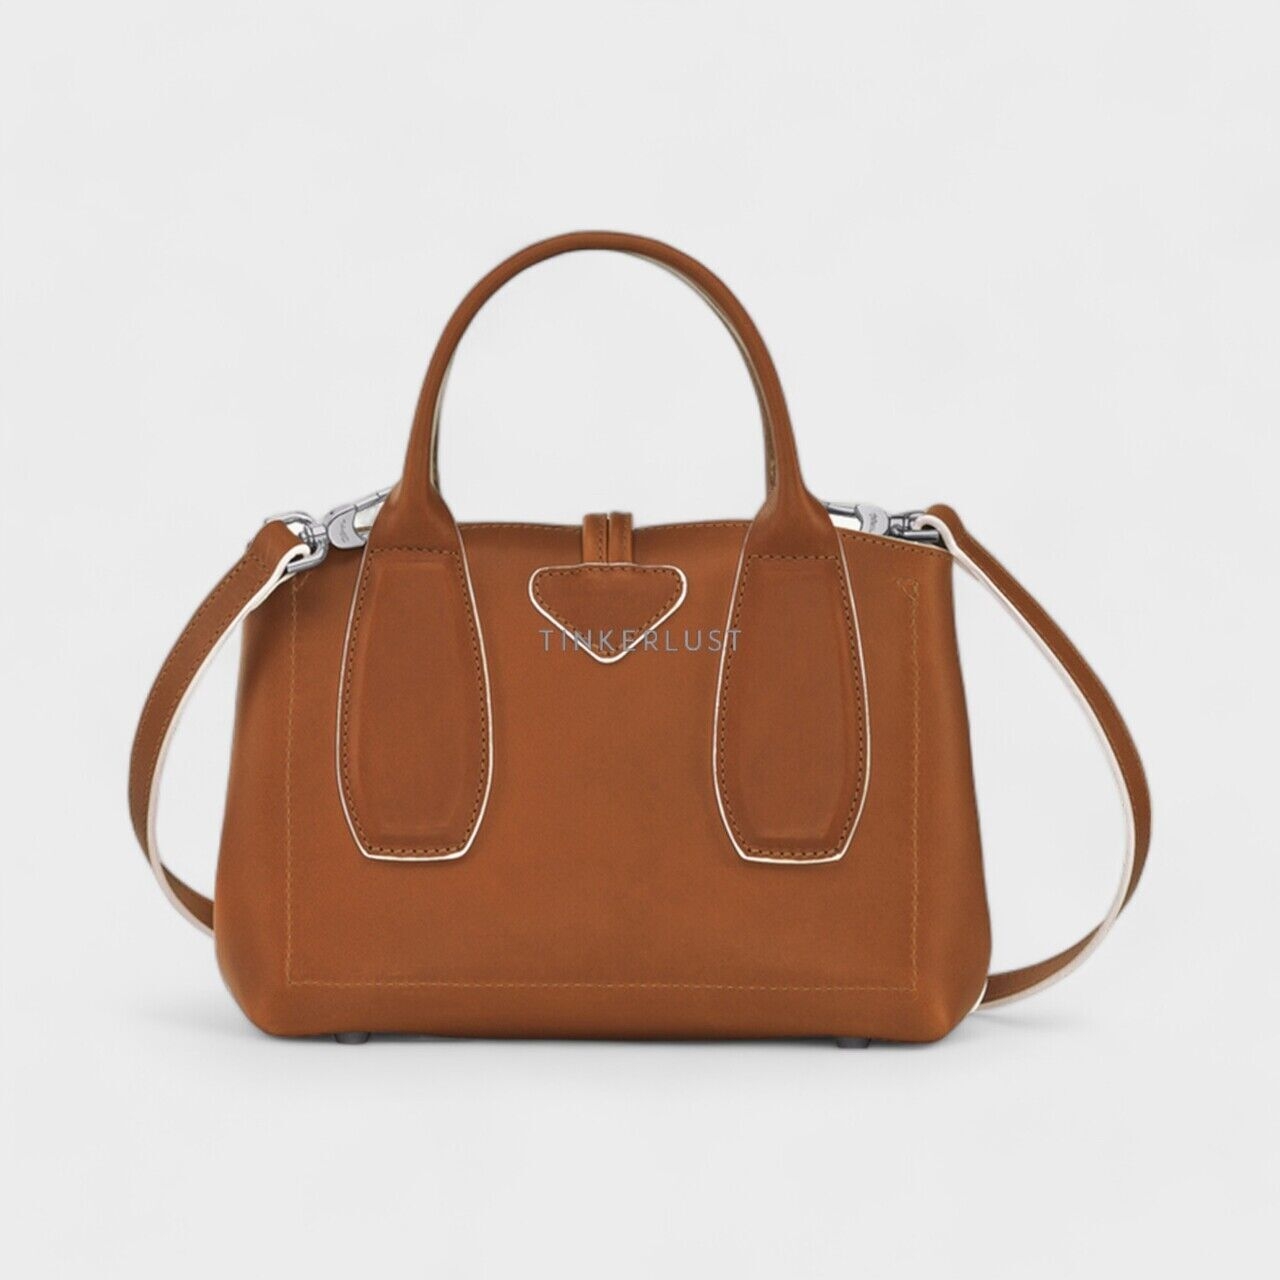 Longchamp Small Roseau in Cognac Leather with White Leaning Top Handle Satchel Bag